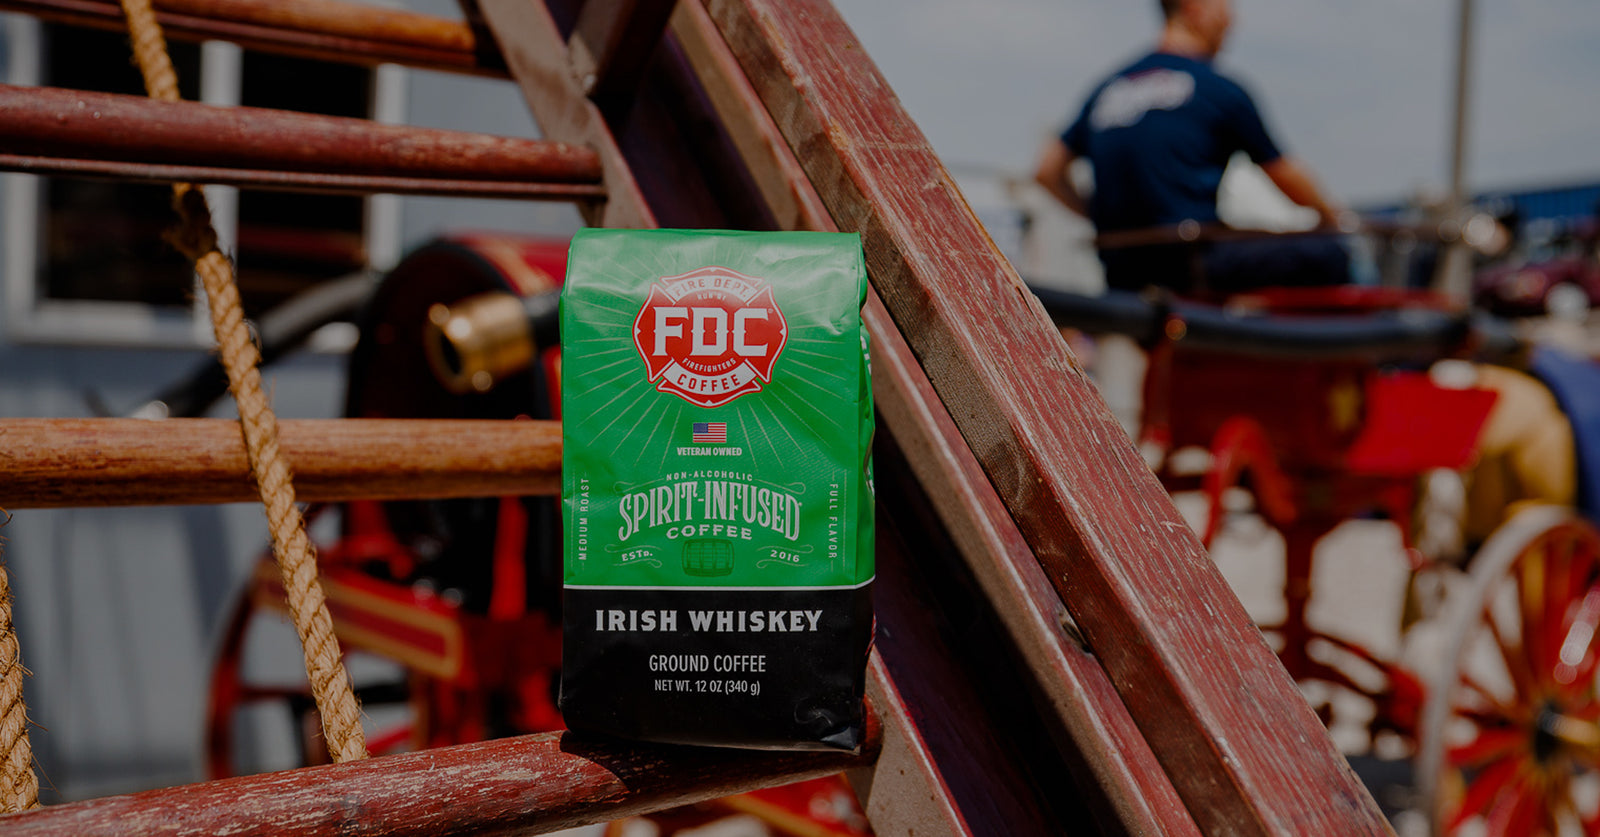 Celebrate World Whisky Day with Spirit-Infused Fire Department Coffee